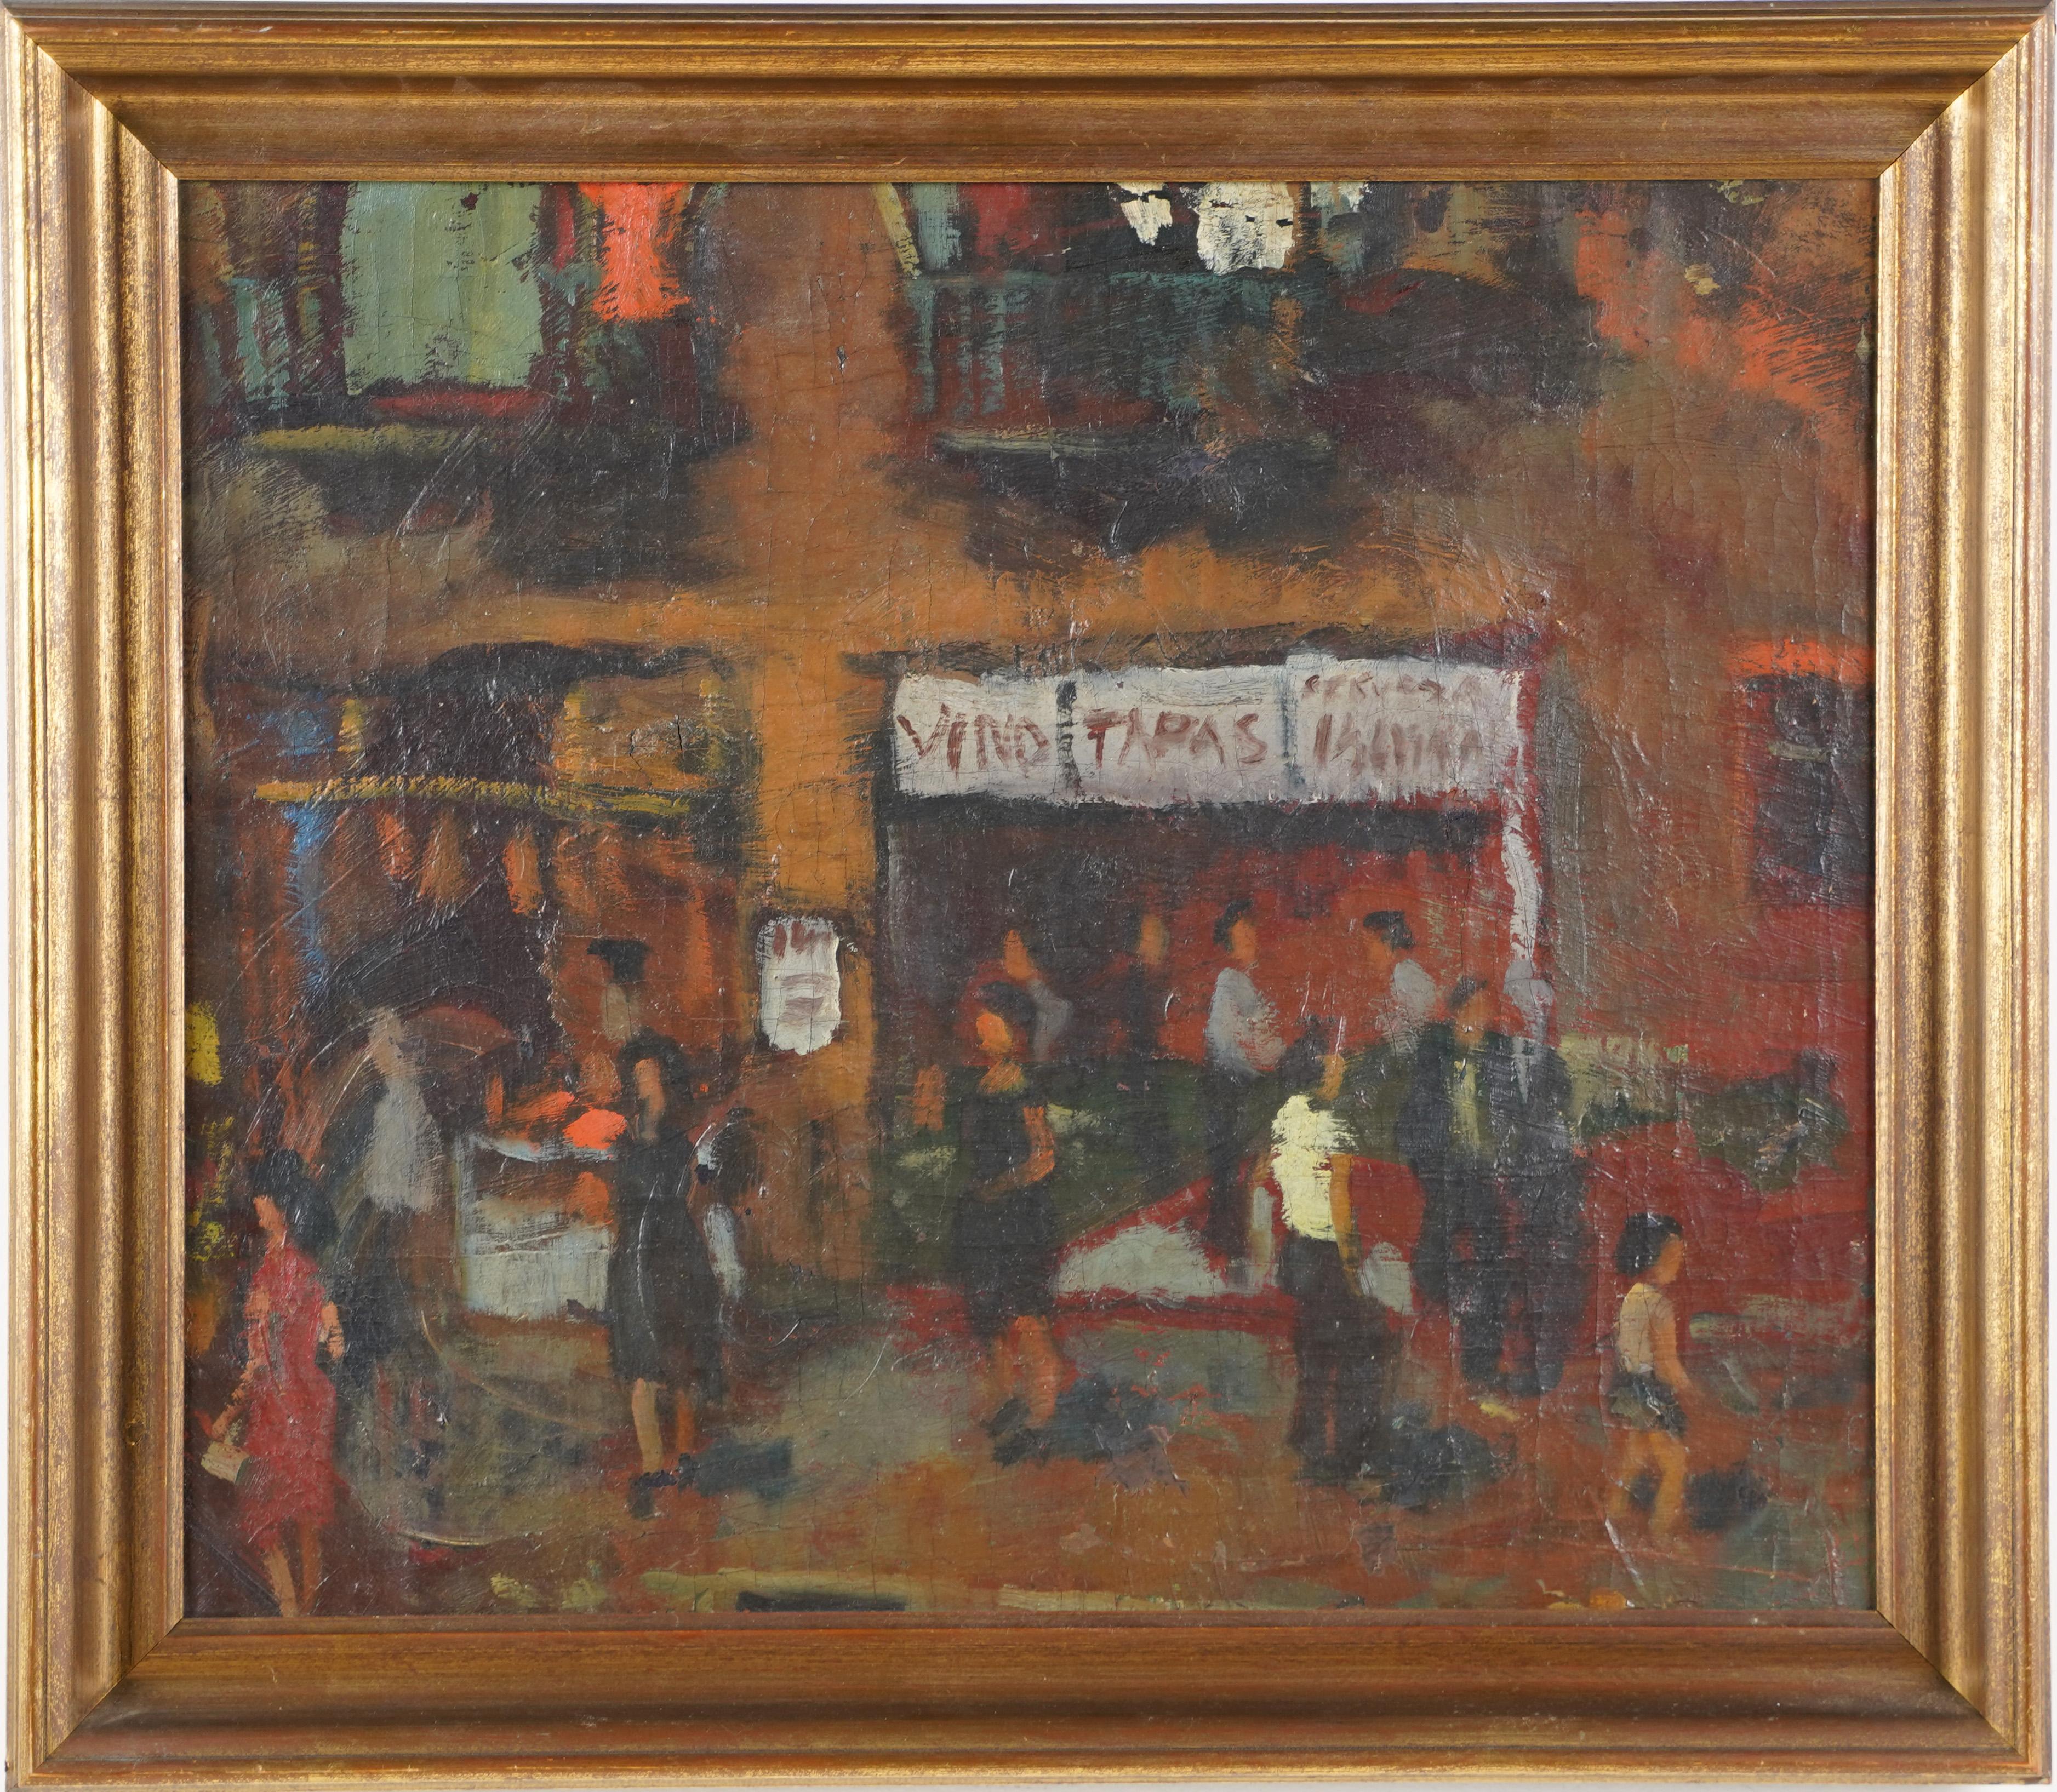 Antique American impressionist cityscape oil painting of Barcelona.  Oil on canvas.  Signed verso.  Framed.  Image size, 18L x 15H.